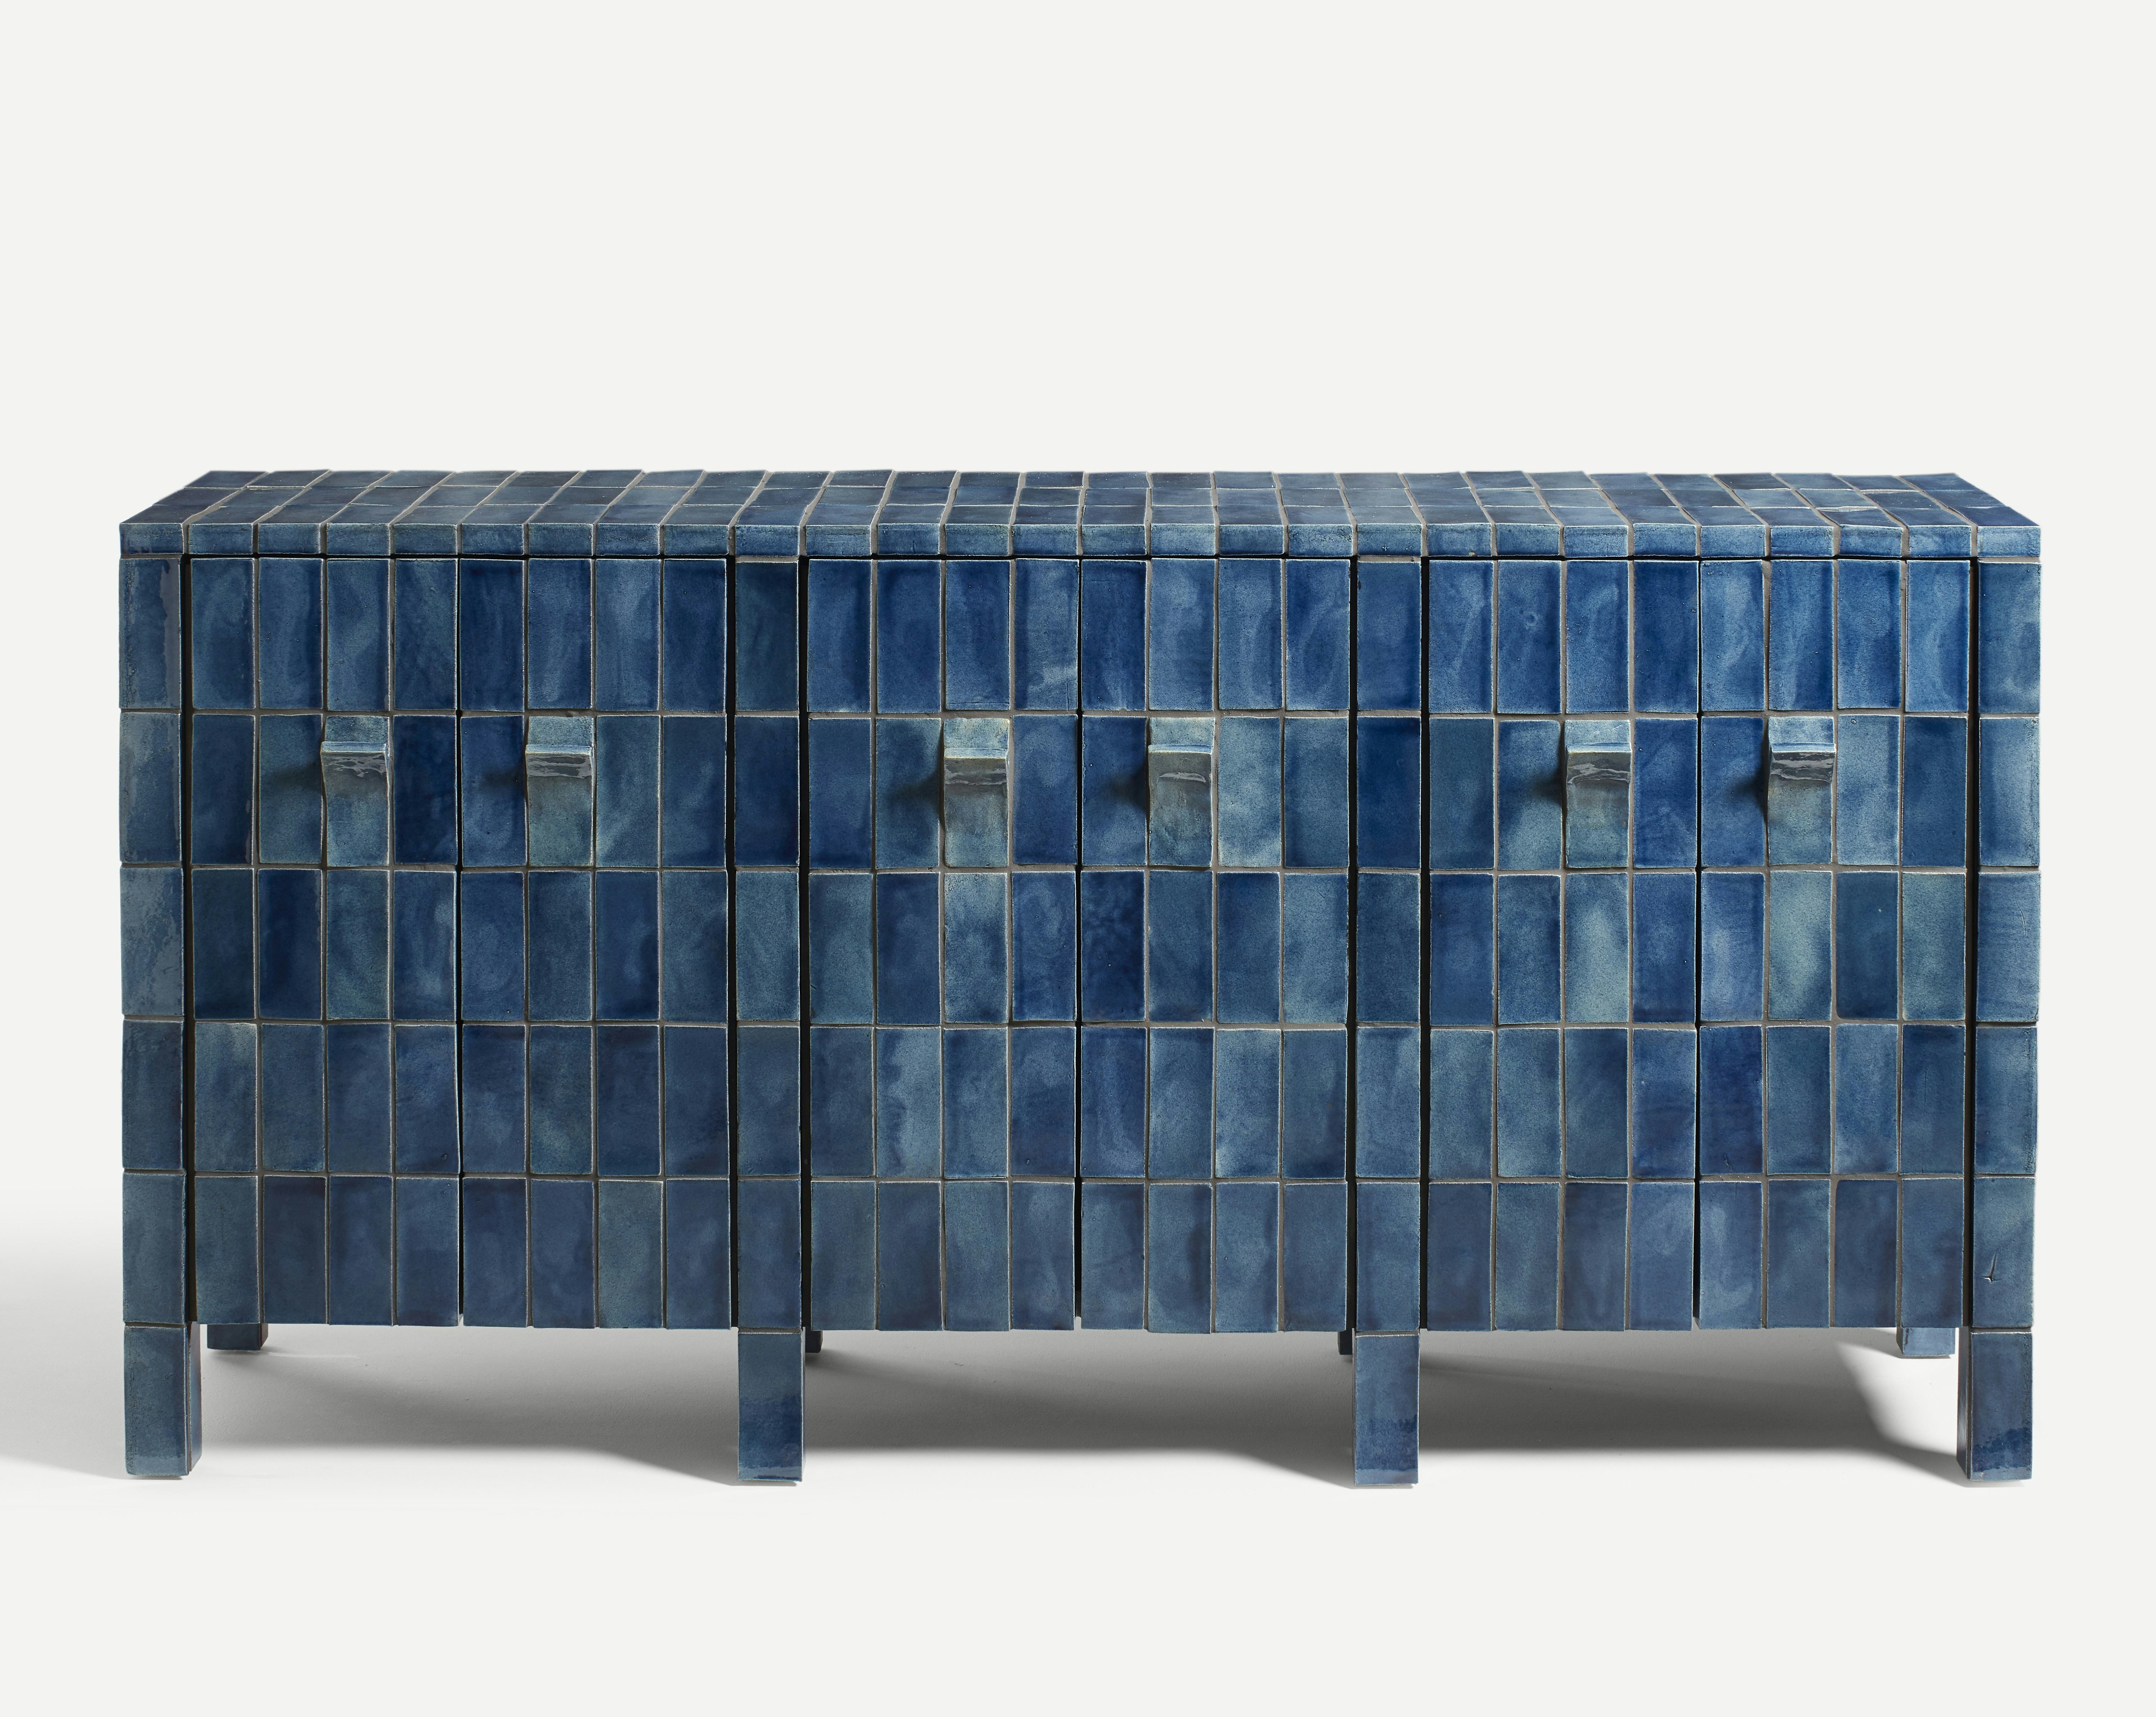 A sideboard clad in handmade blue tiles